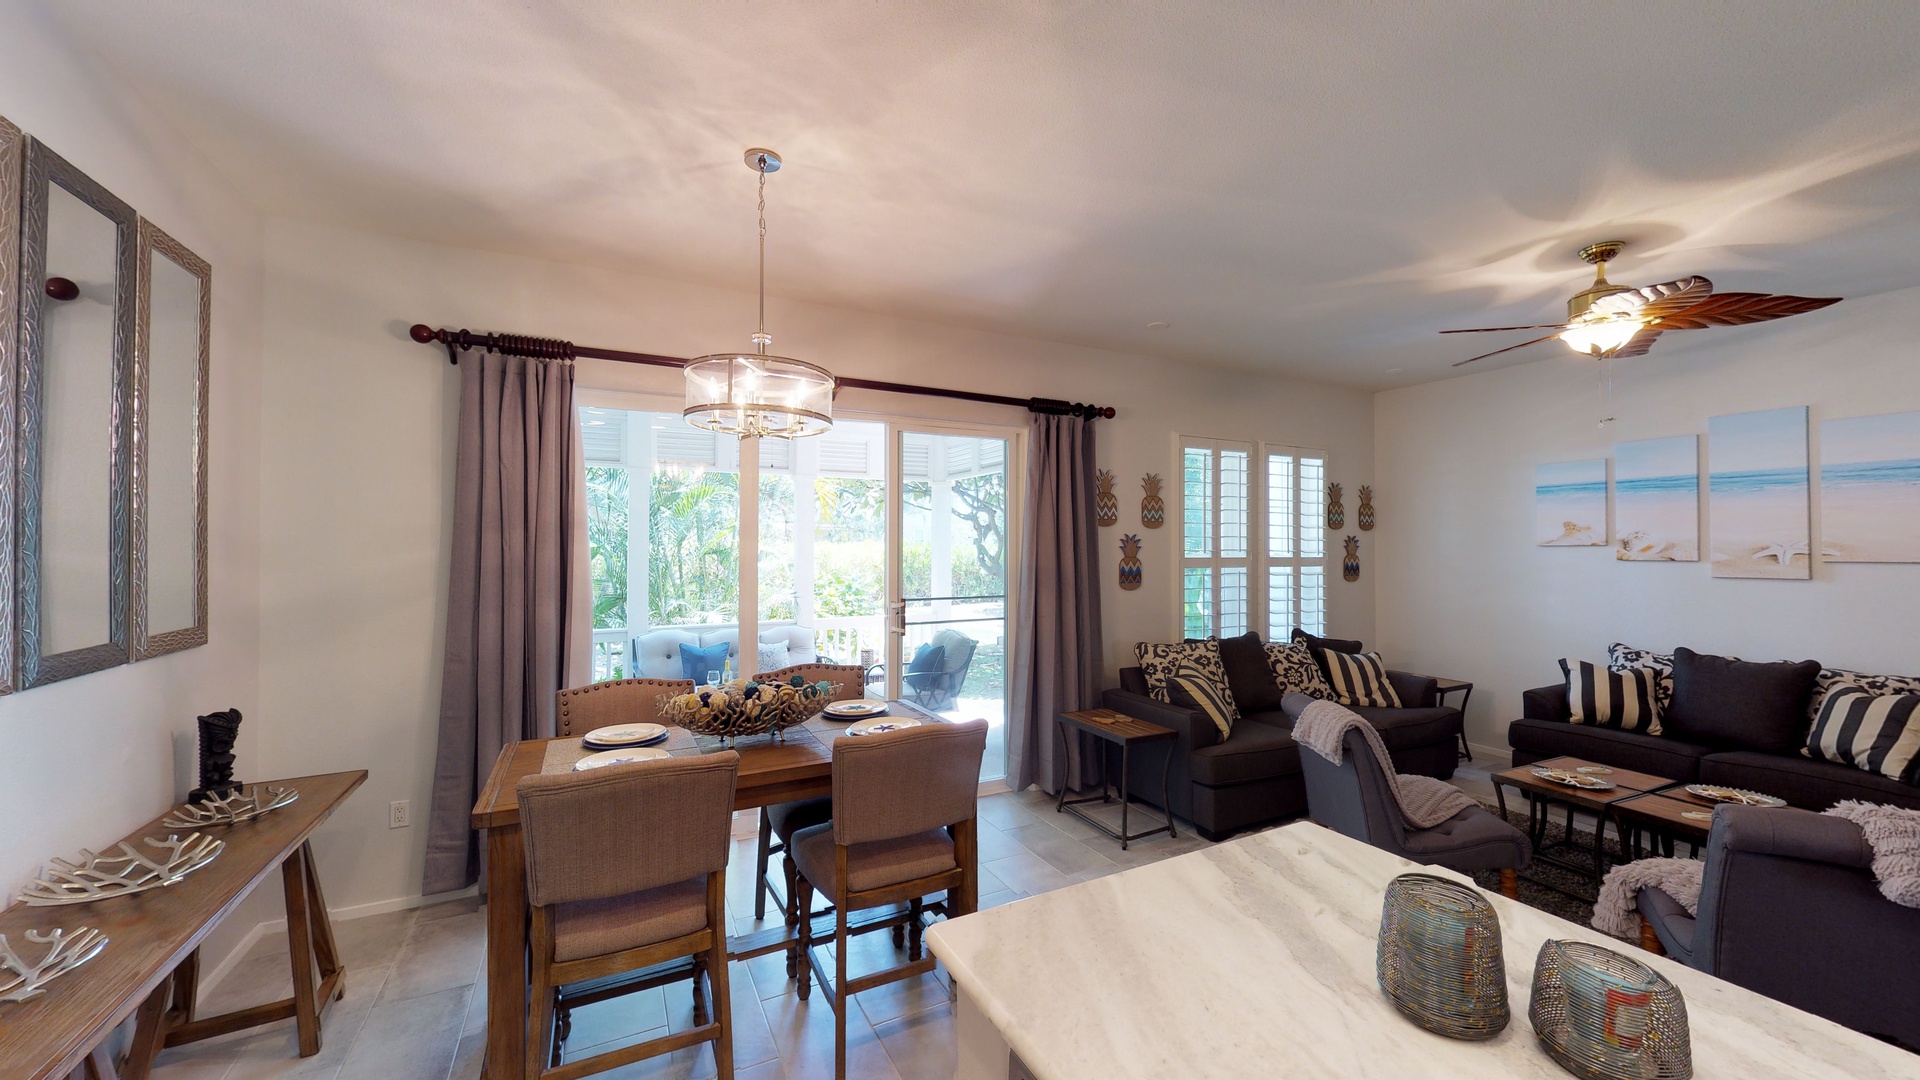 Kapolei Vacation Rentals, Coconut Plantation 1222-3 - Dine on an elegant meal while conversing with the chef.